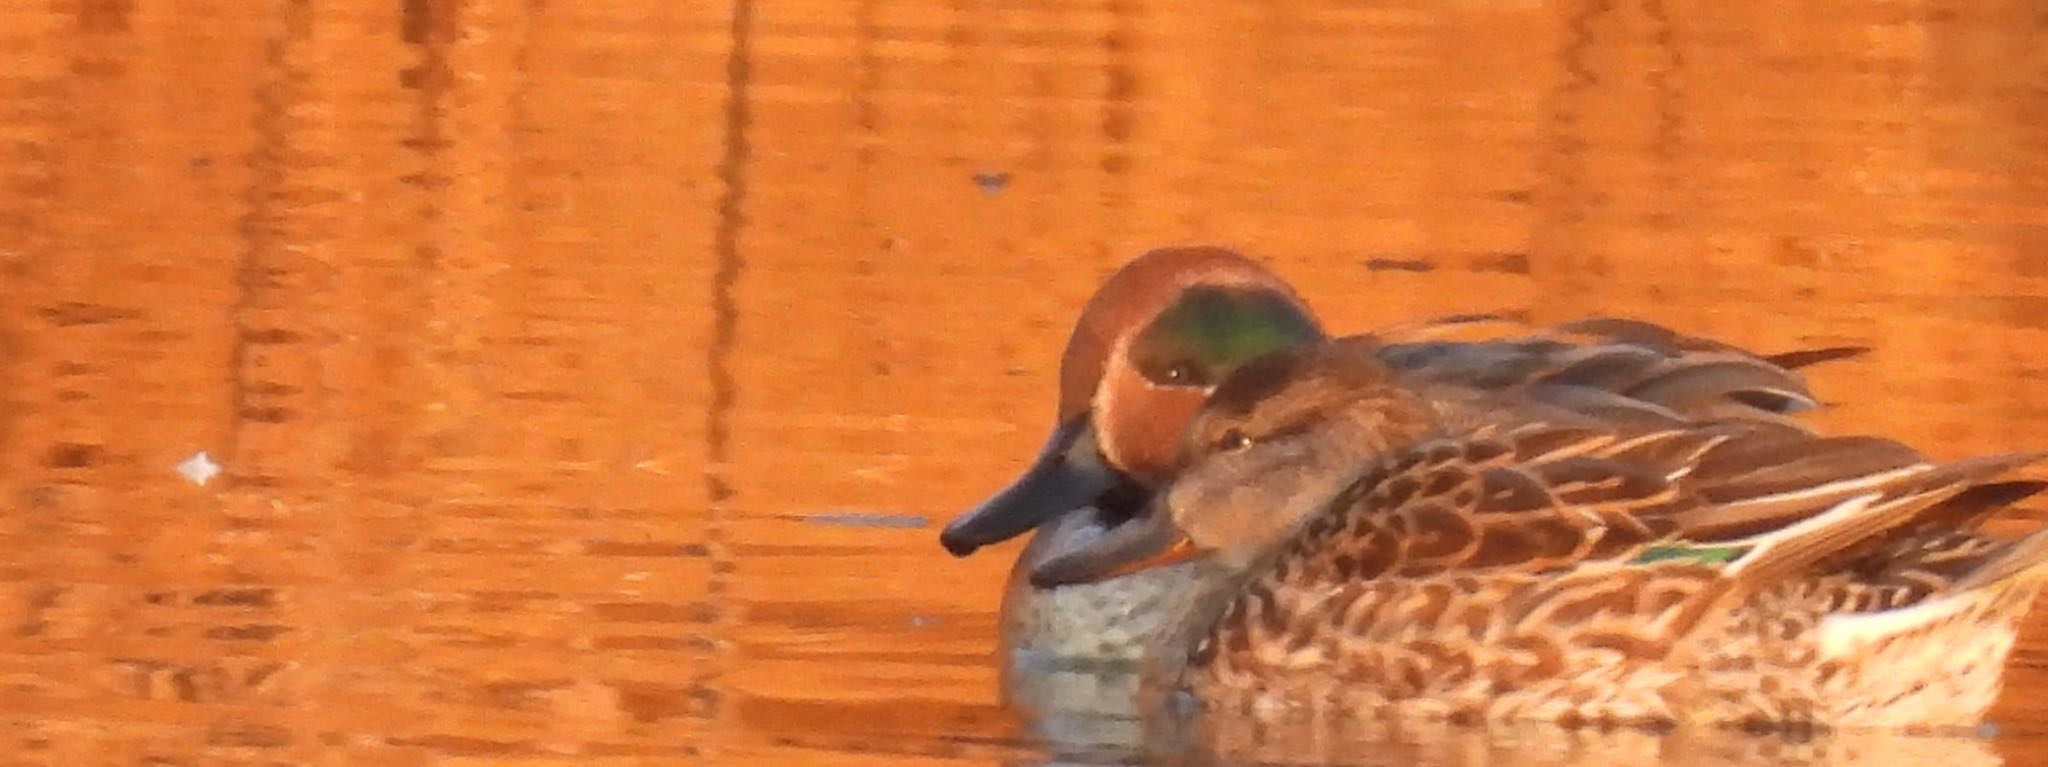 Photo of Eurasian Teal at さい川さくら公園 by ちか